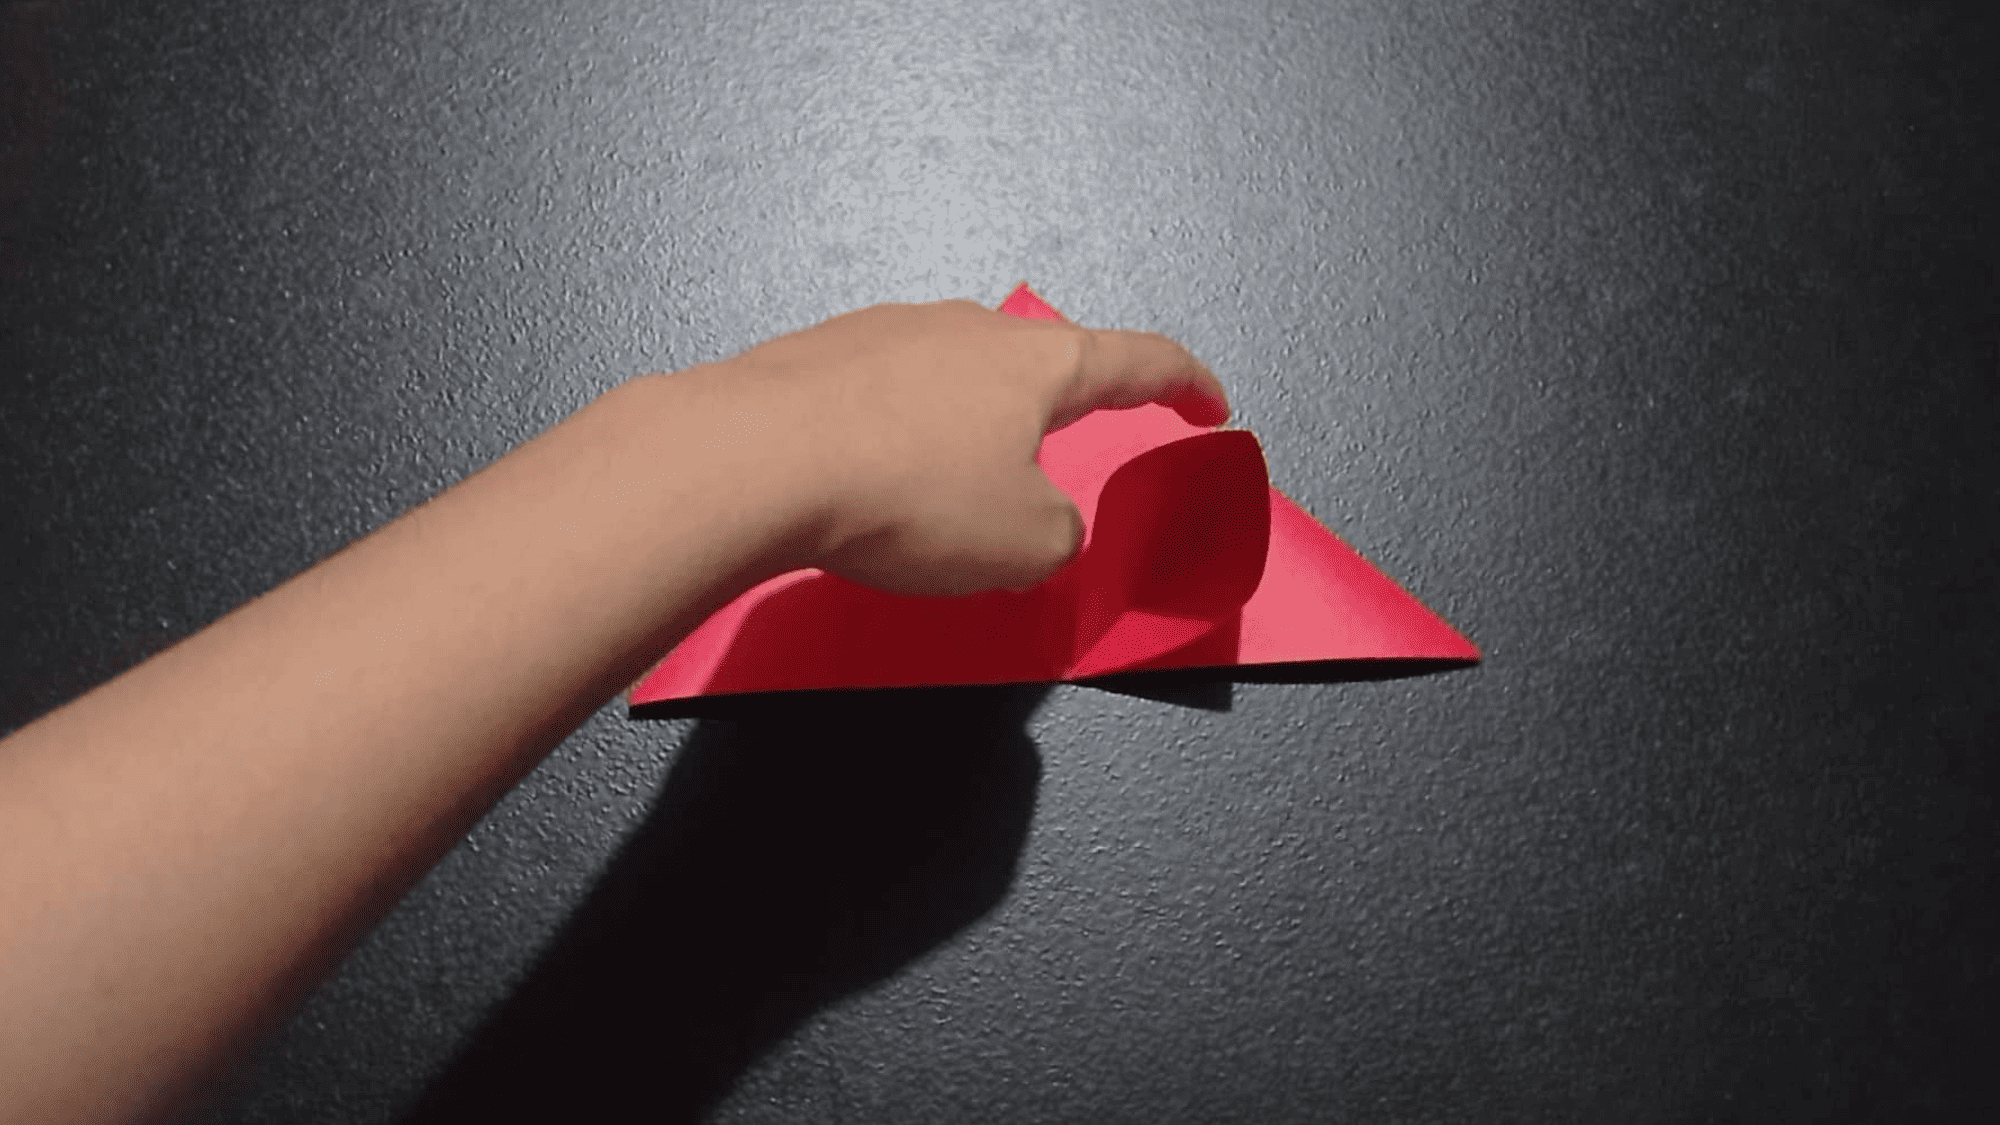 origami rose instructions step 8.1